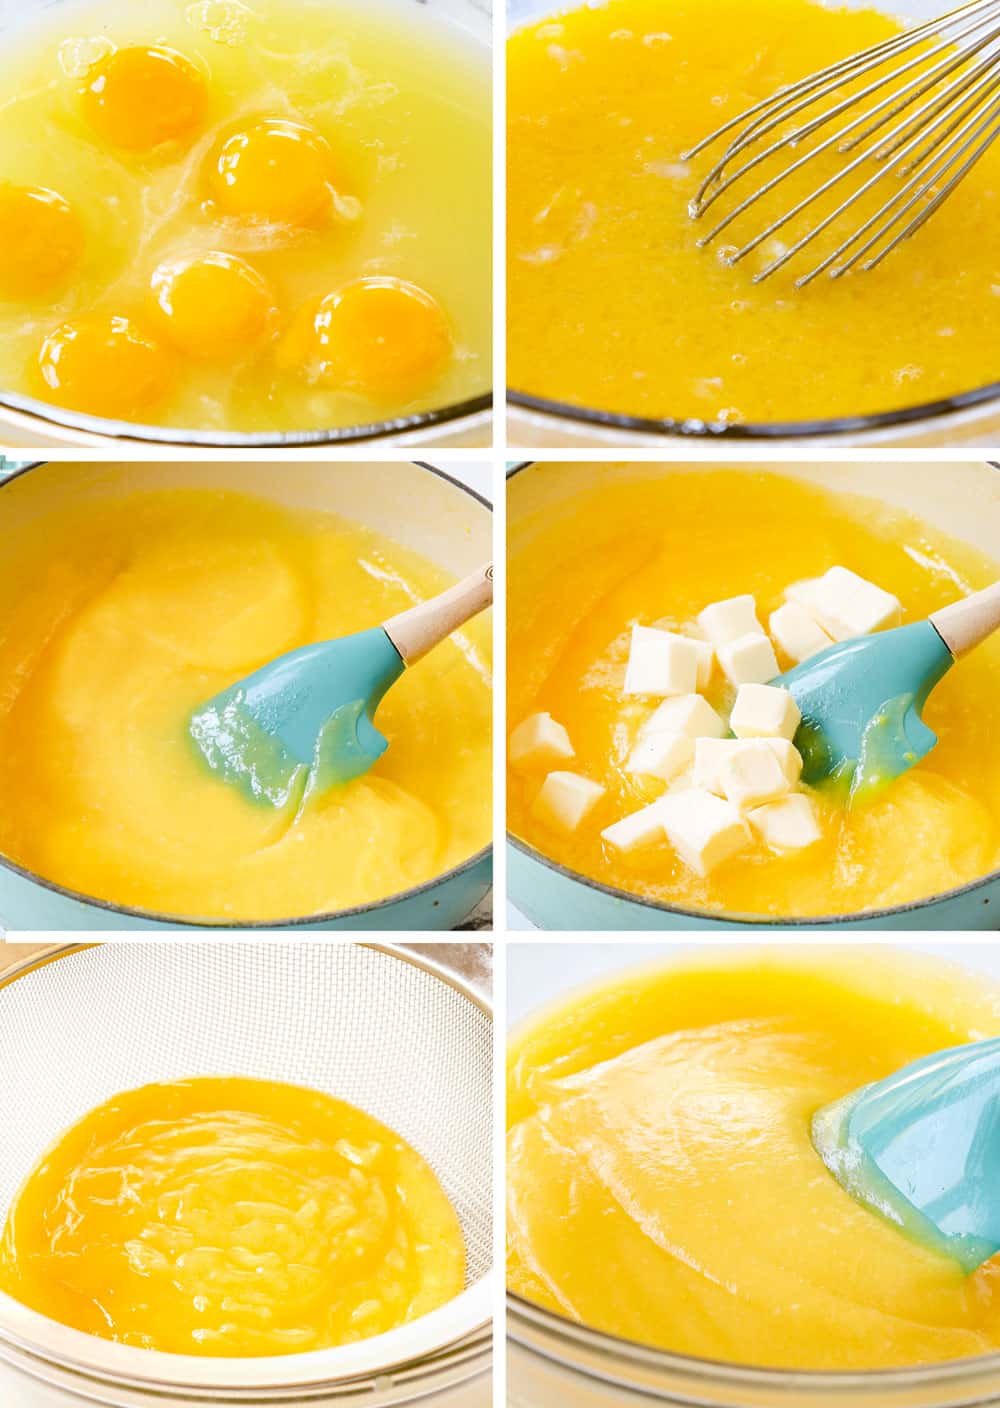 a collage showing how to make lemon cheesecake bars by 1) whisking egg yolks, sugar and lemon juice together, 2) simmering the lemon curd until thickened, 3) adding butter to melt, 4) straining lemon curd